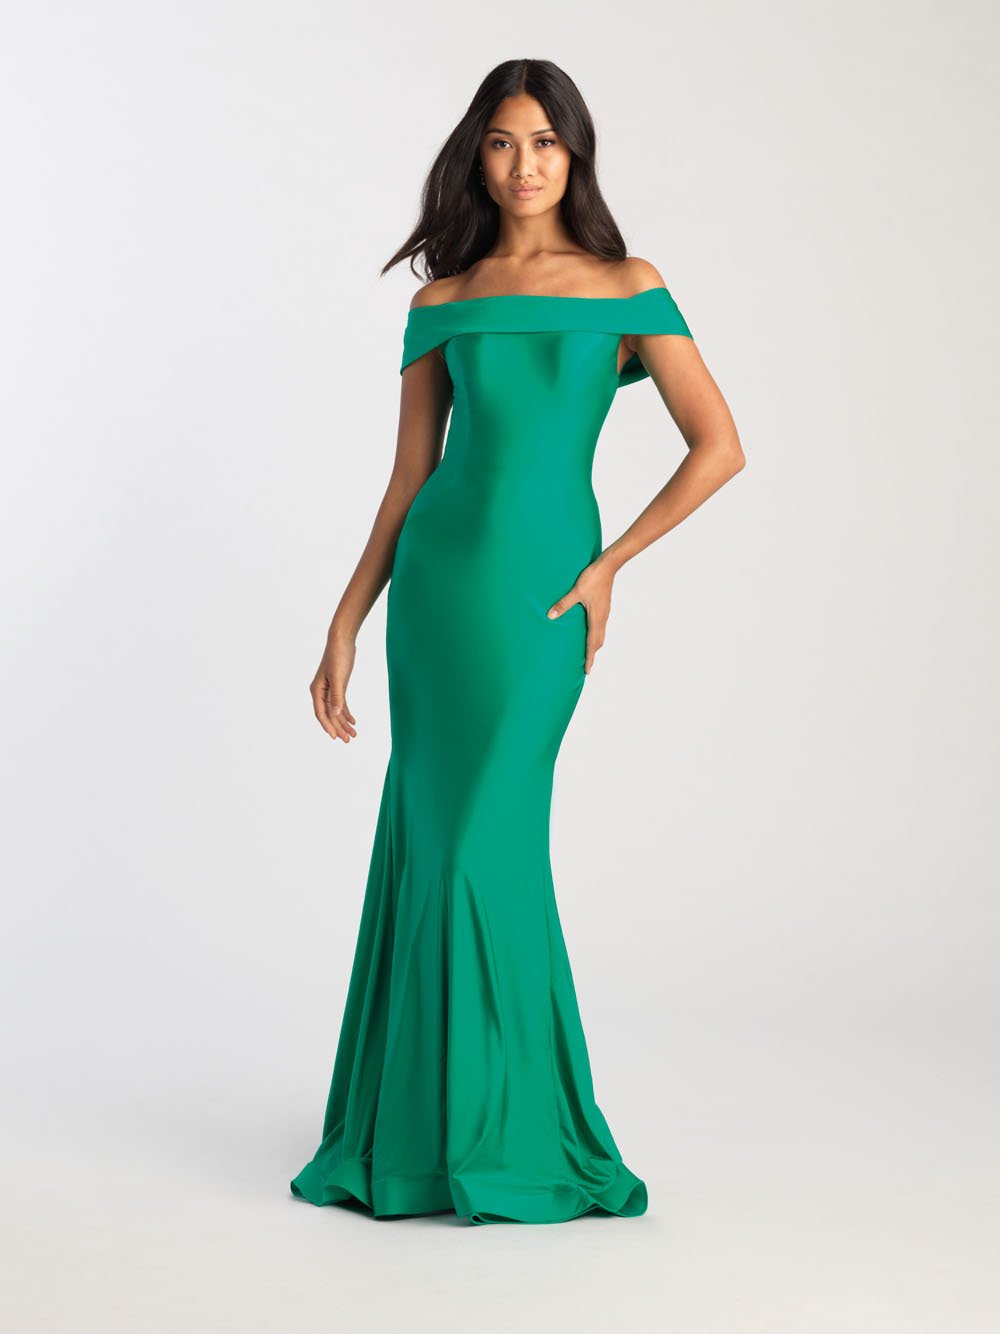 Madison James 20-397 dress images in these colors: Green, Blue, Canary.